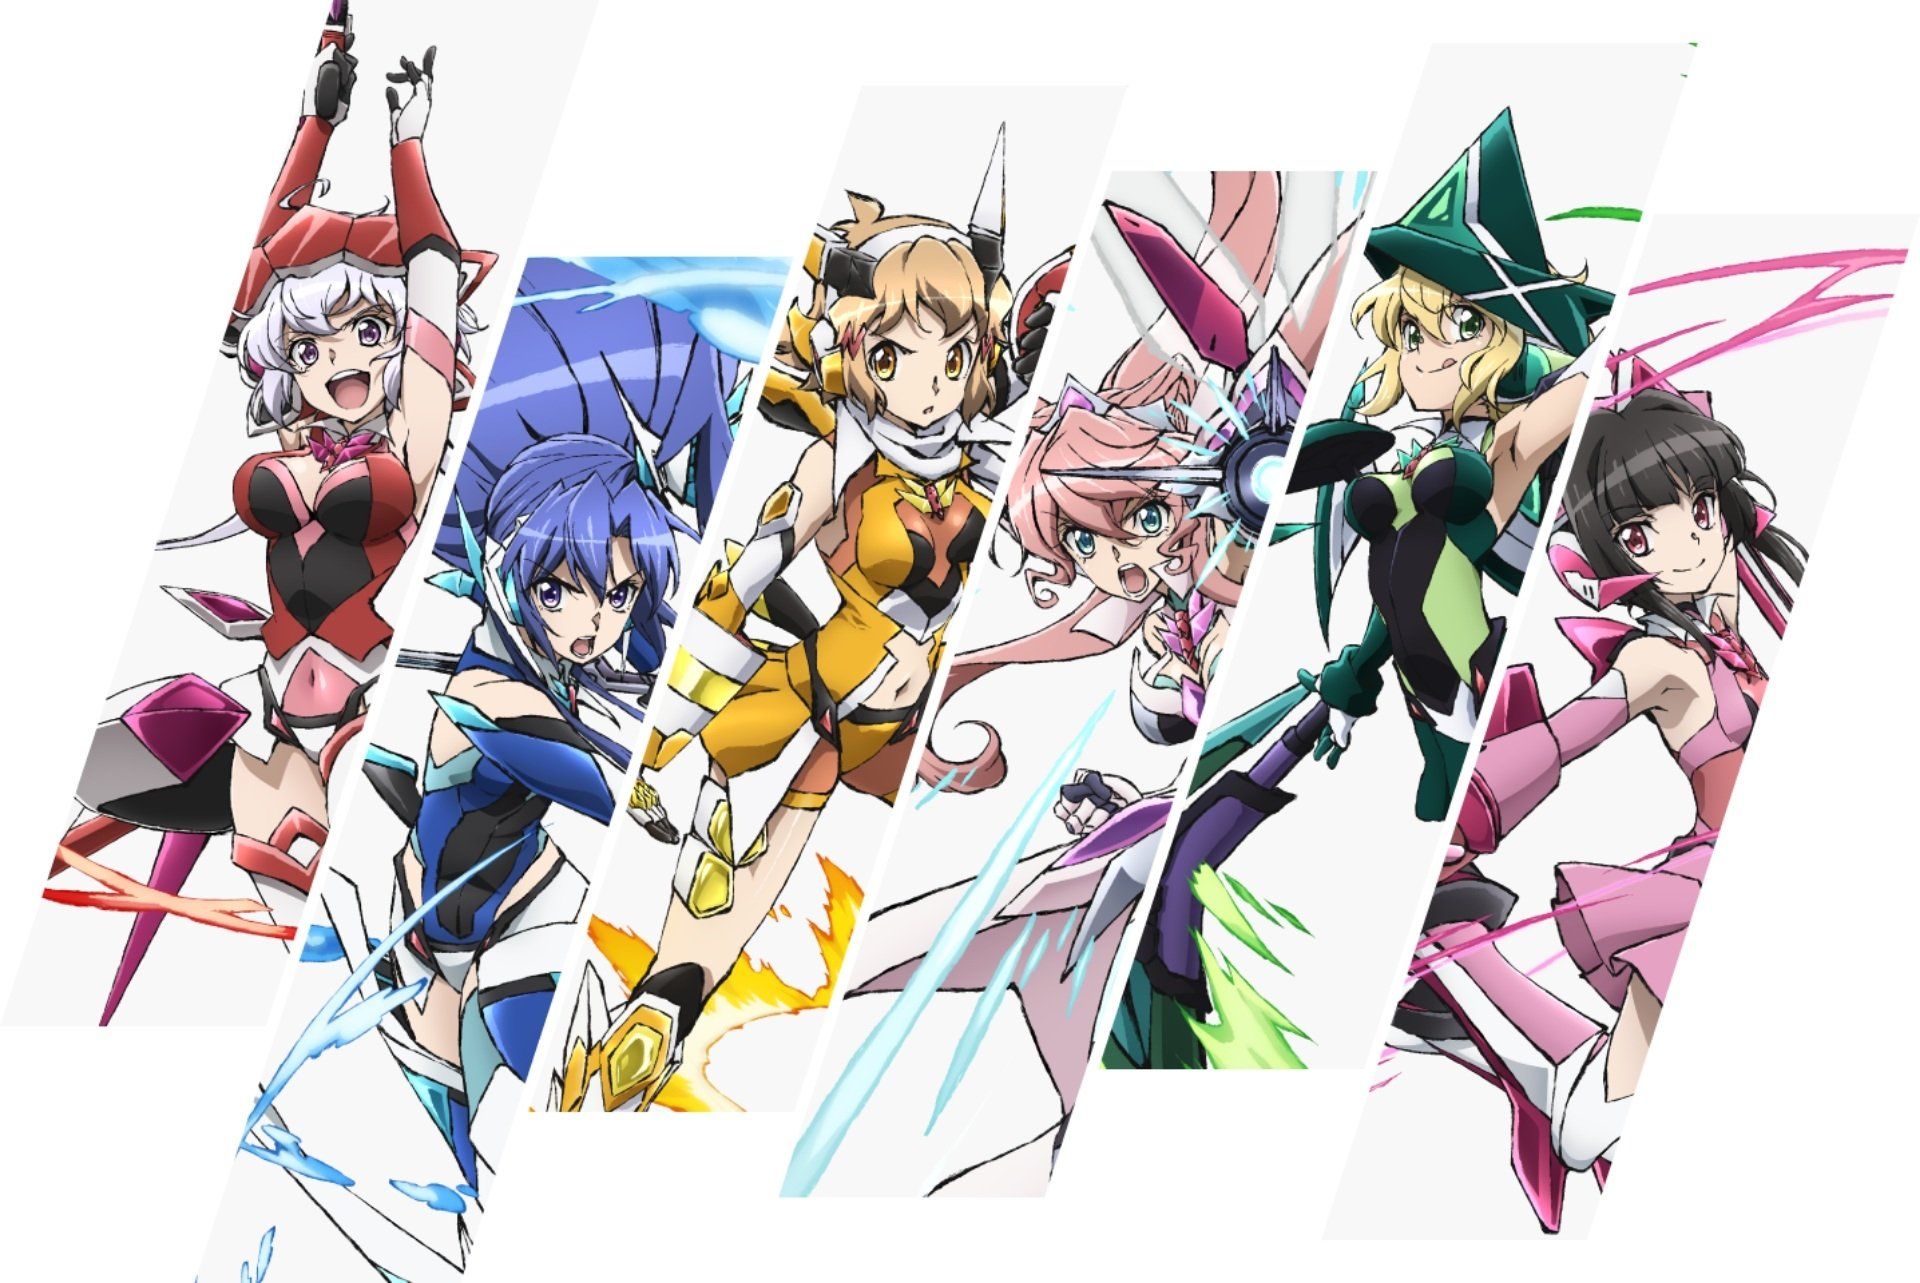 Amazon.com: Anime Poster Symphogear 1 Poster Canvas Wall Art Prints for  Wall Decor Room Decor Bedroom Decor Gifts 16x24inch(40x60cm) Unframe-style:  Posters & Prints